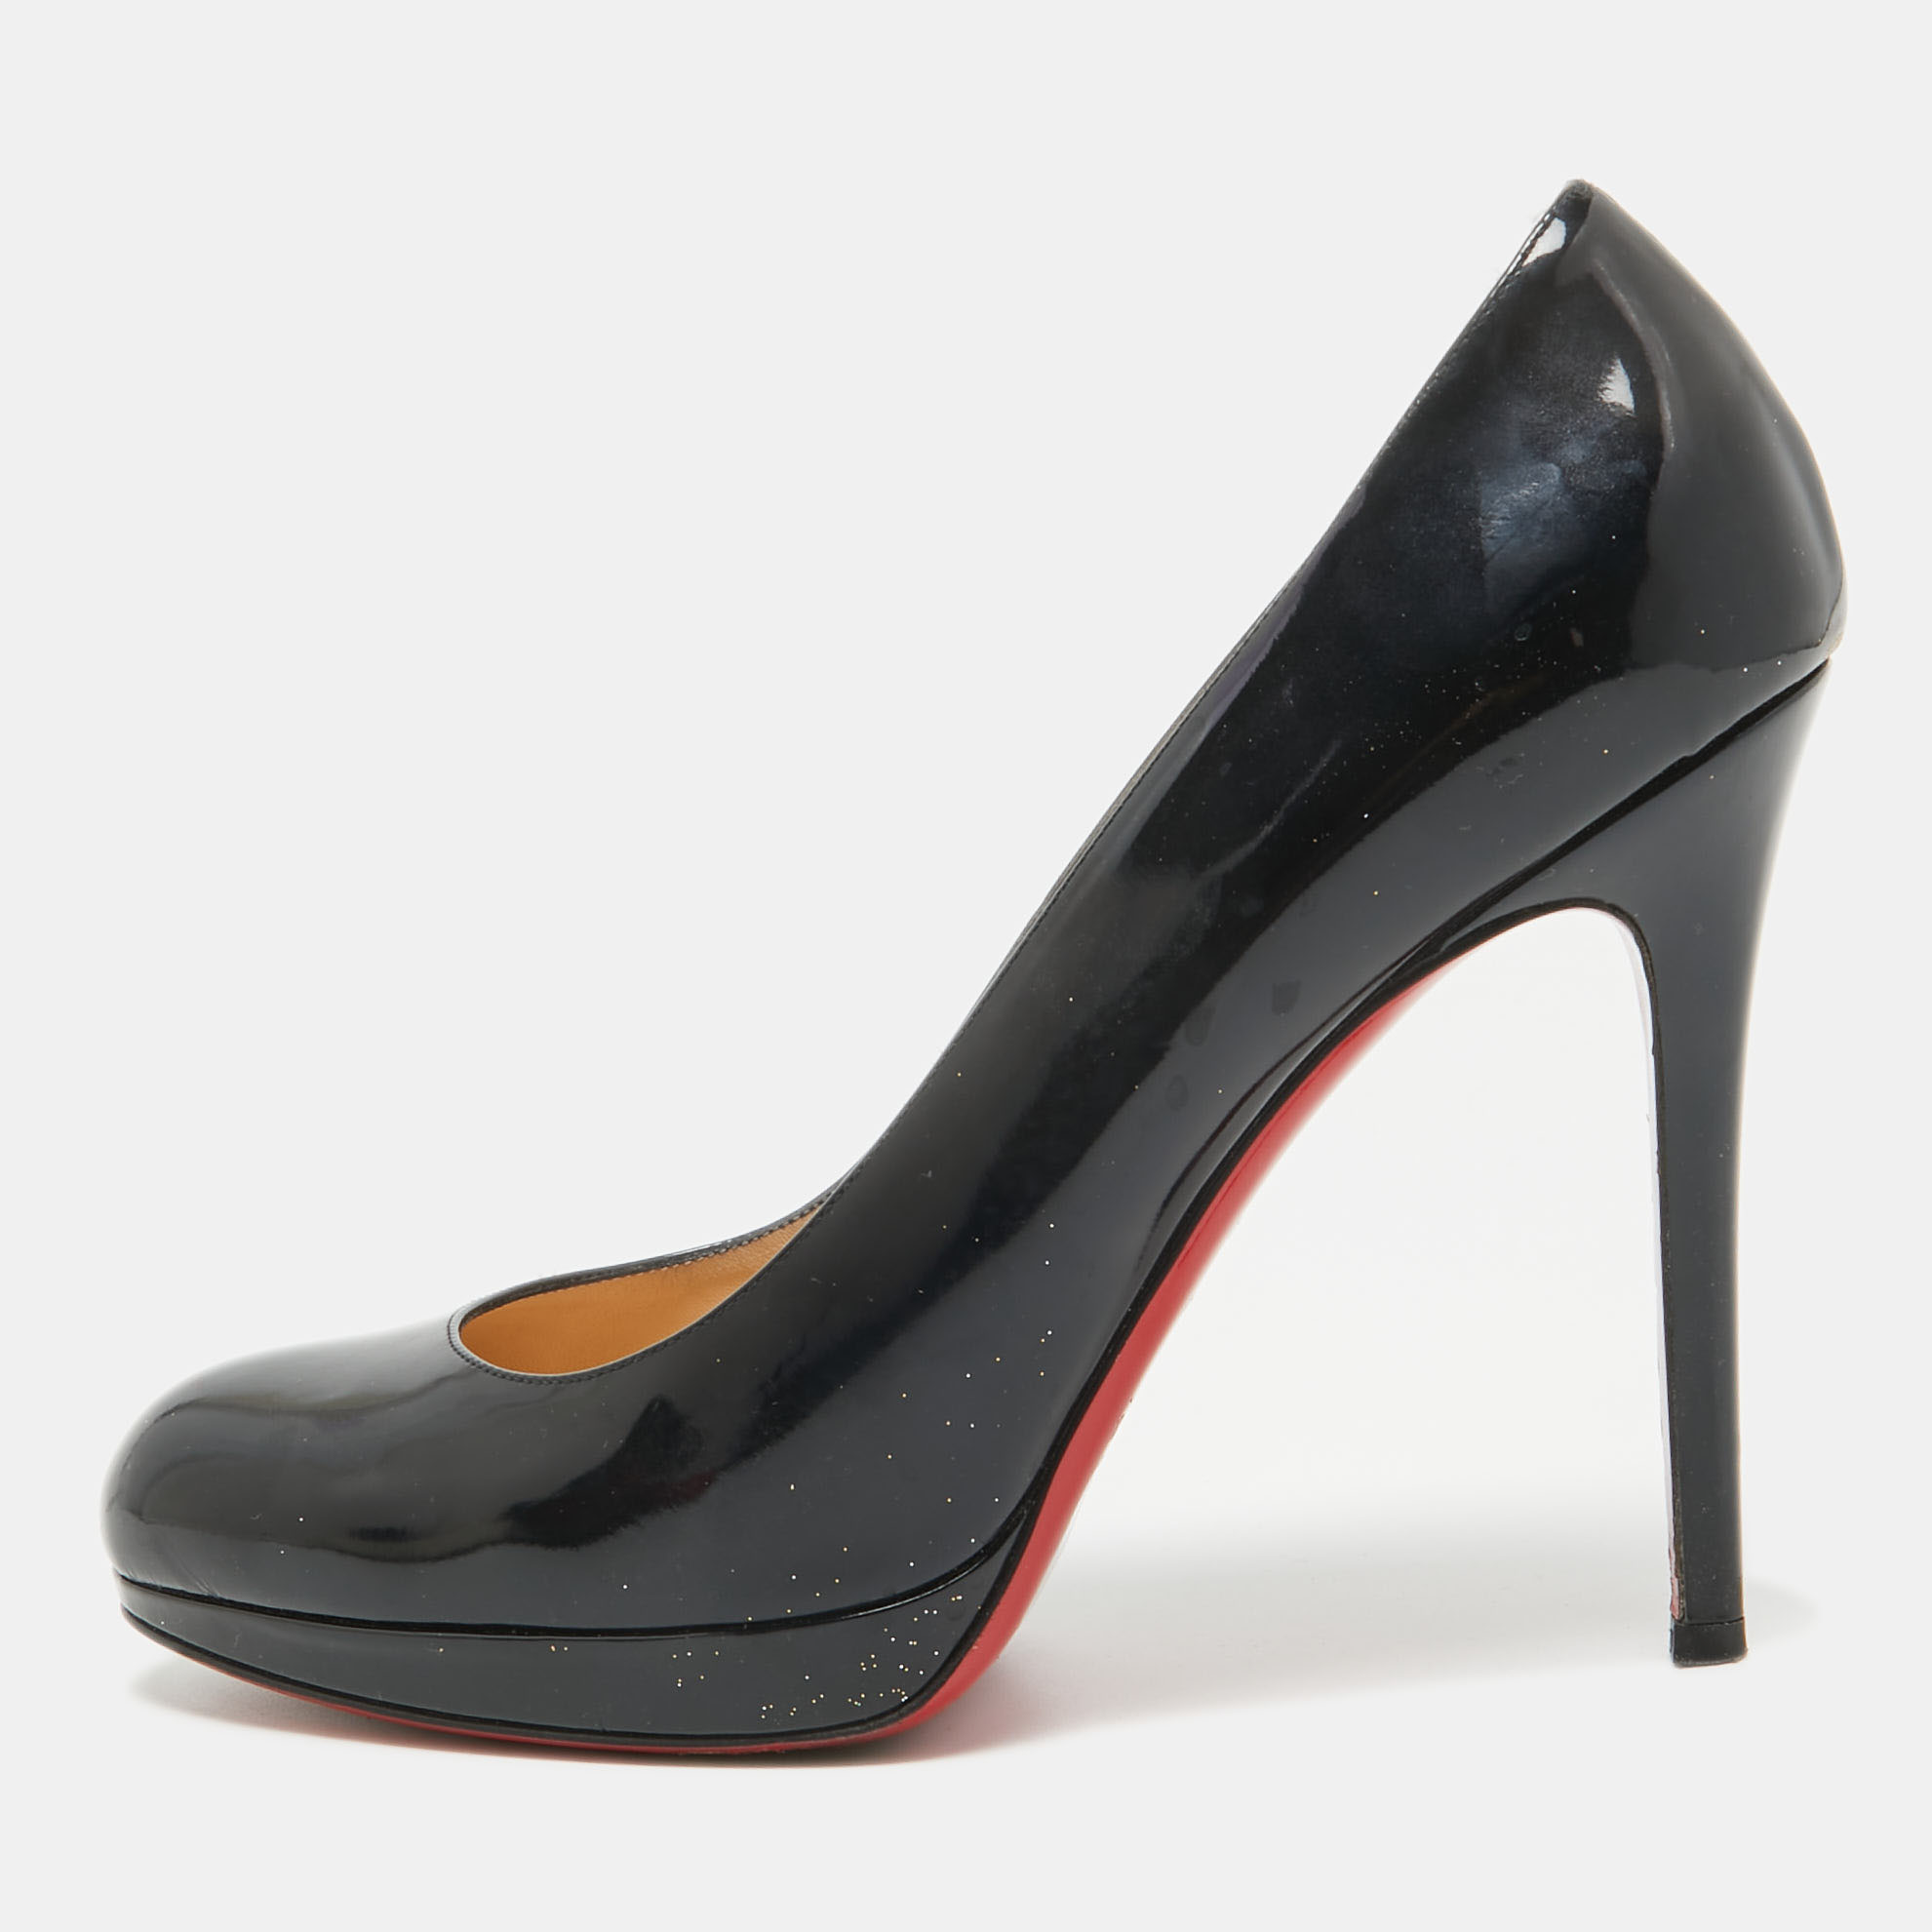 The fashion house's tradition of excellence coupled with modern design sensibilities works to make these Christian Louboutin pumps a fabulous choice. Theyll help you deliver a chic look with ease.